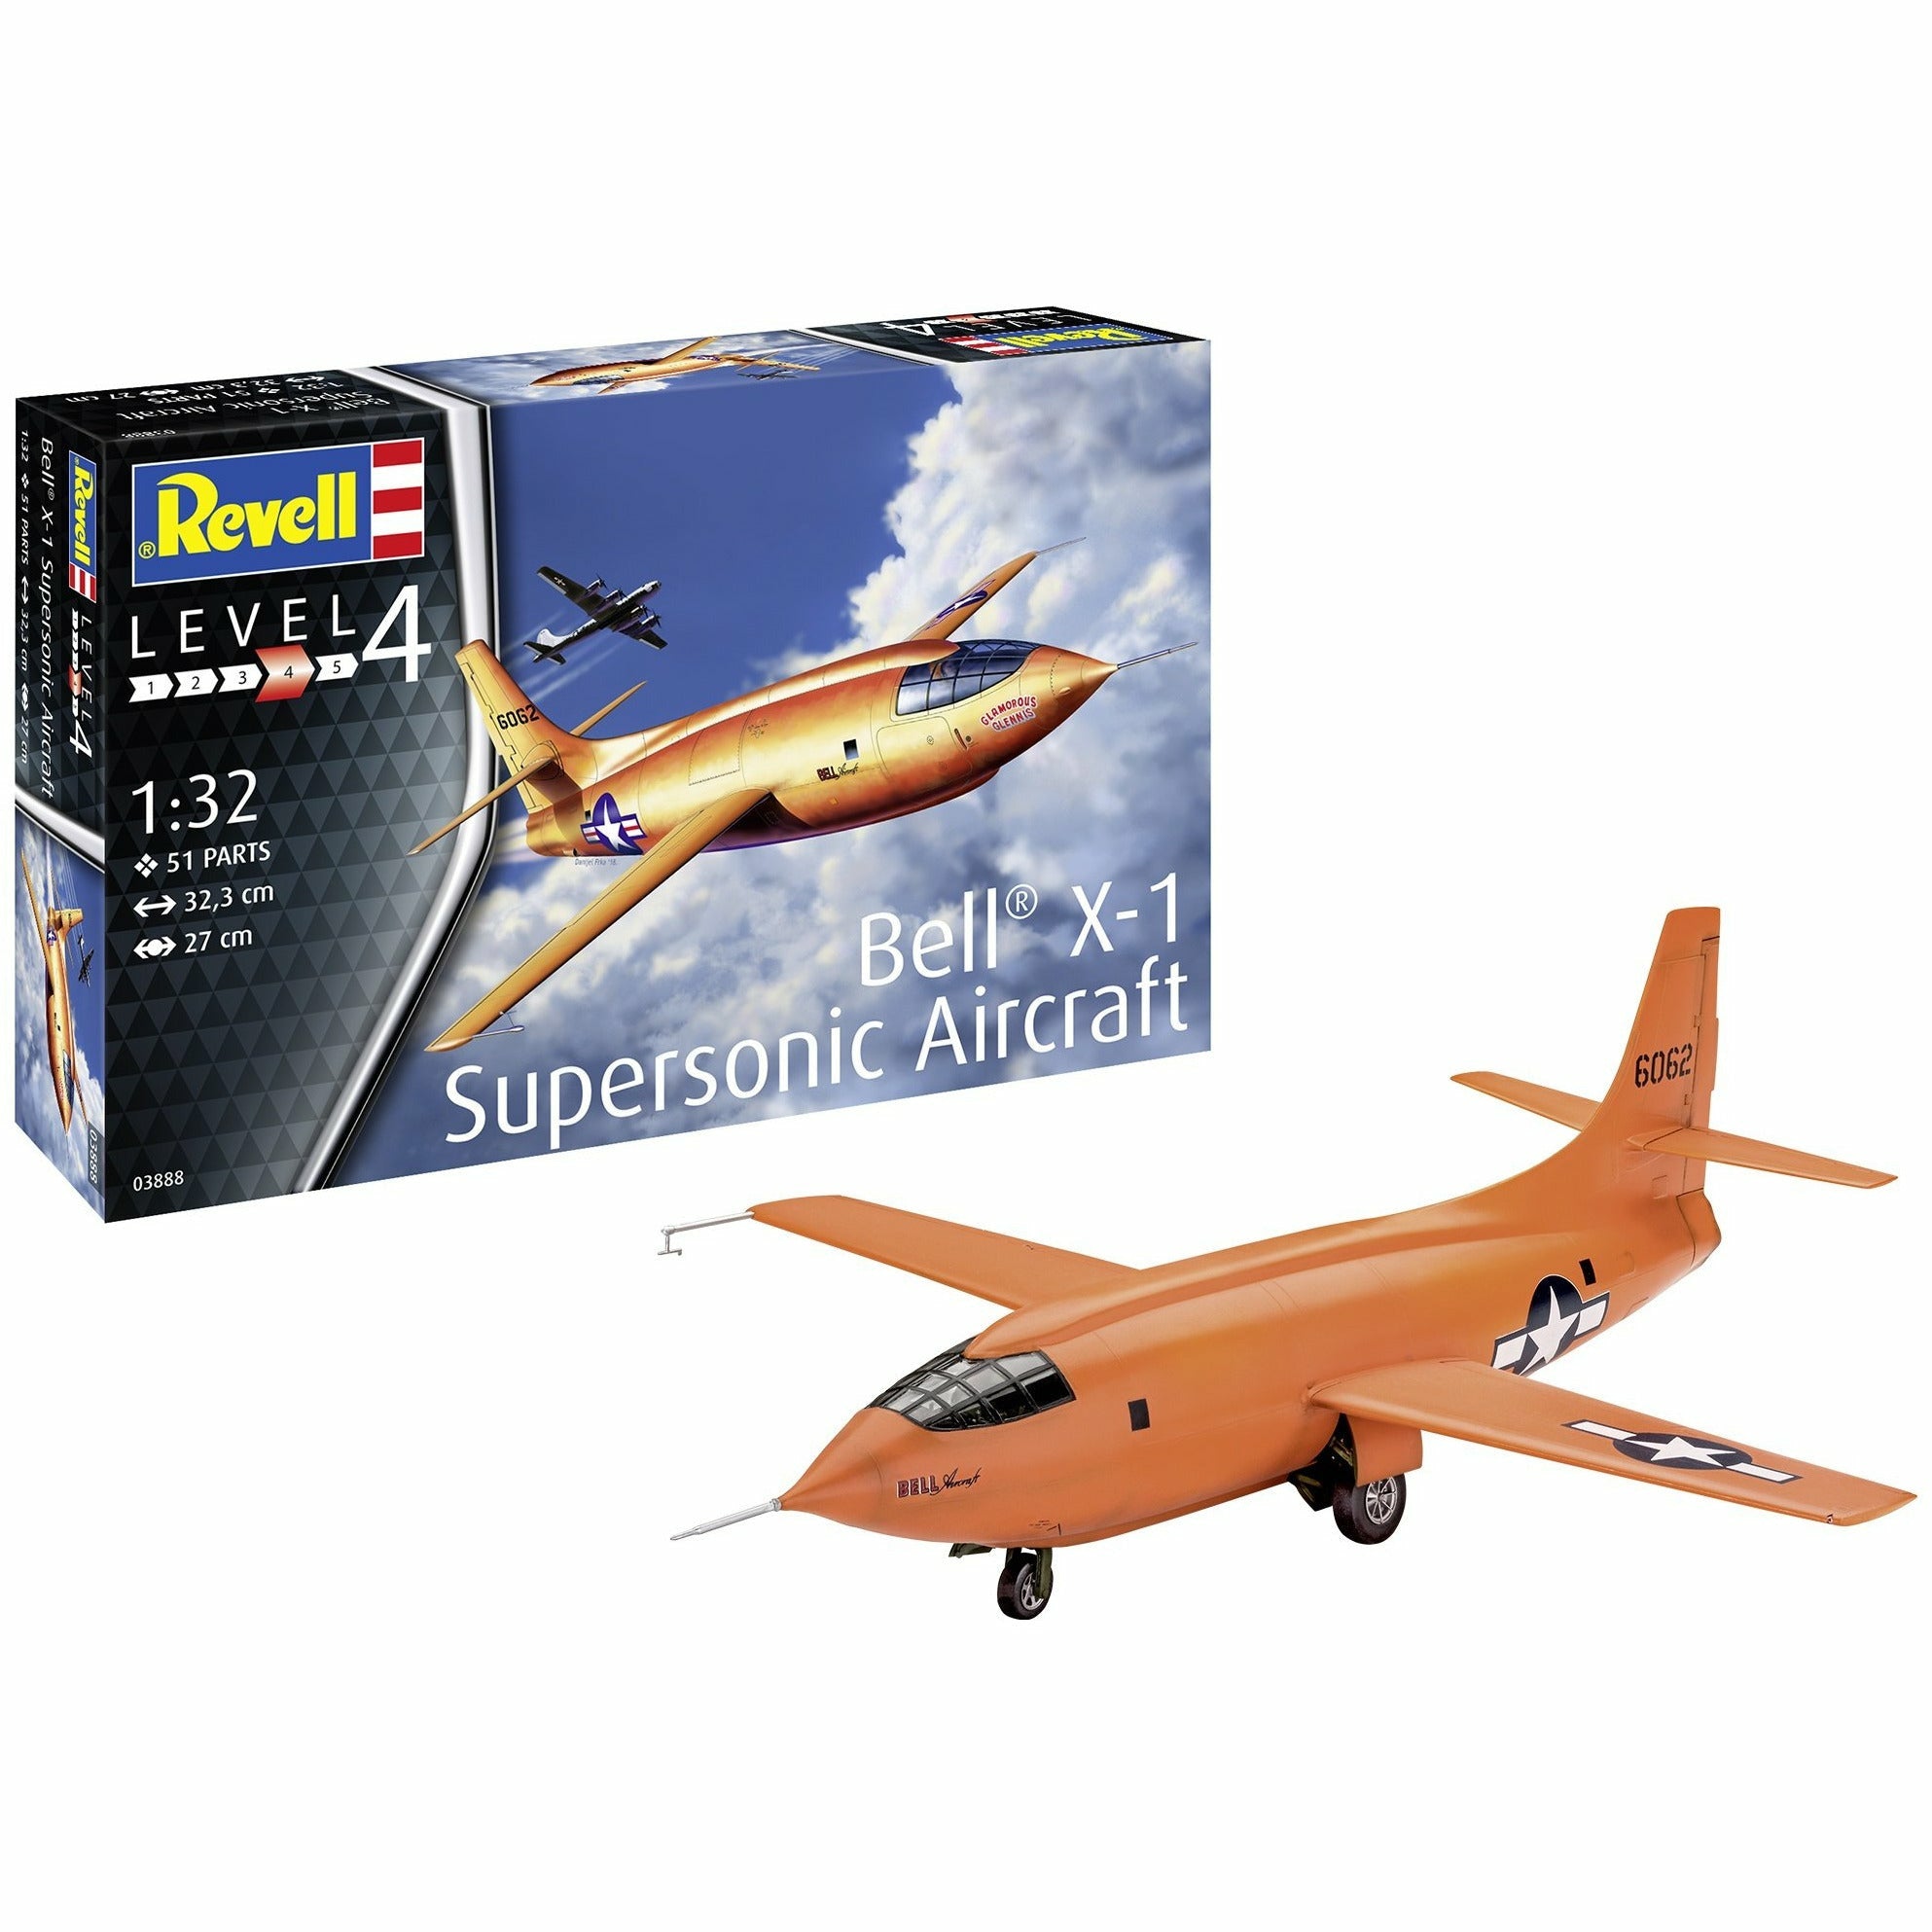 Bell X-1 Supersonic Aircraft 1/32 by Revell